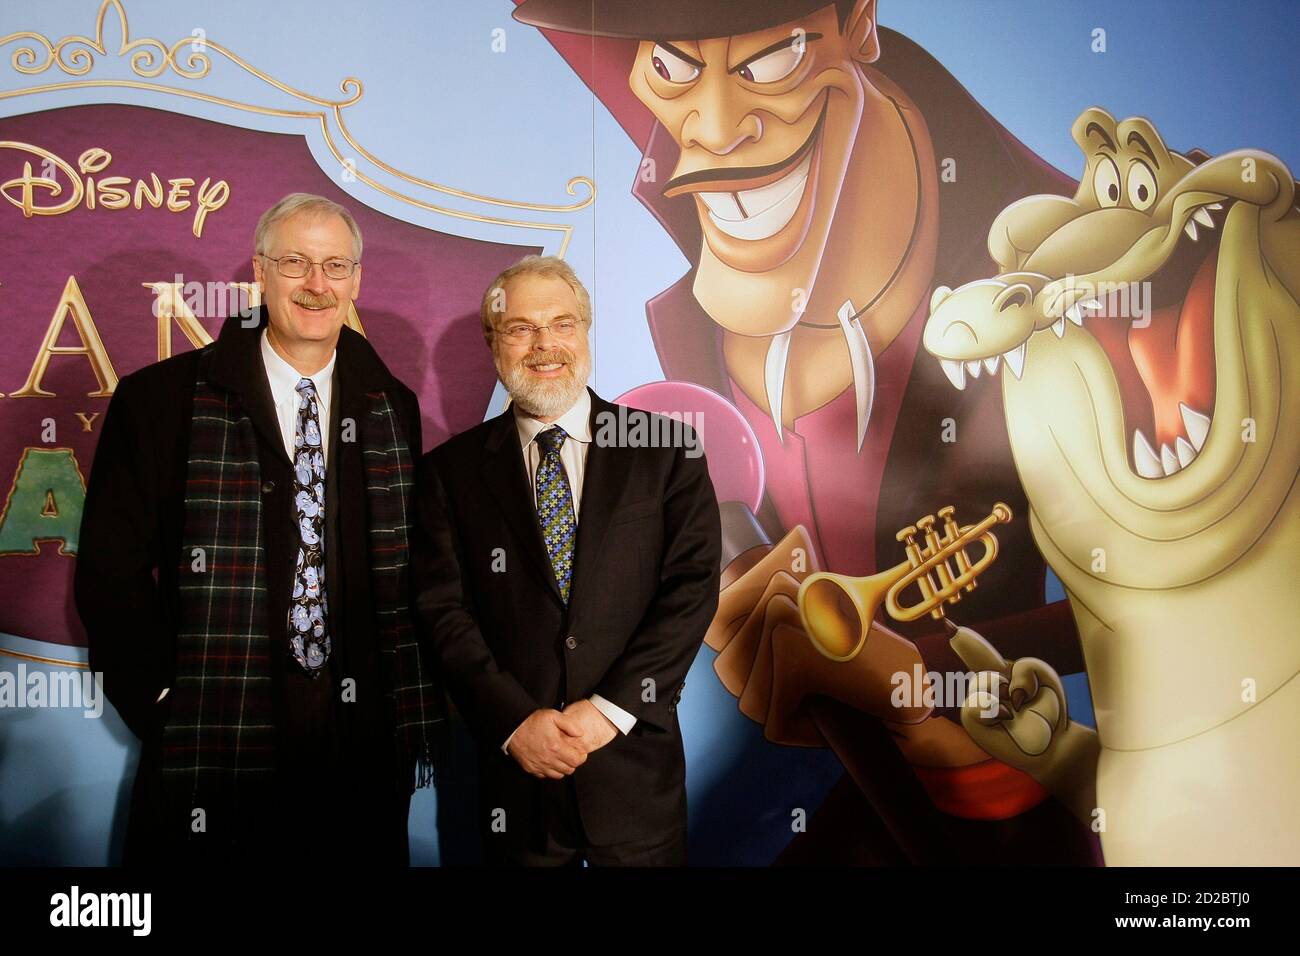 Directors John Musker (L) and Ron Clements pose during the Spanish premiere of  'The Princess and the Frog' in Madrid, January 29, 2010. REUTERS/Andrea Comas (SPAIN - Tags: ENTERTAINMENT) Stock Photo